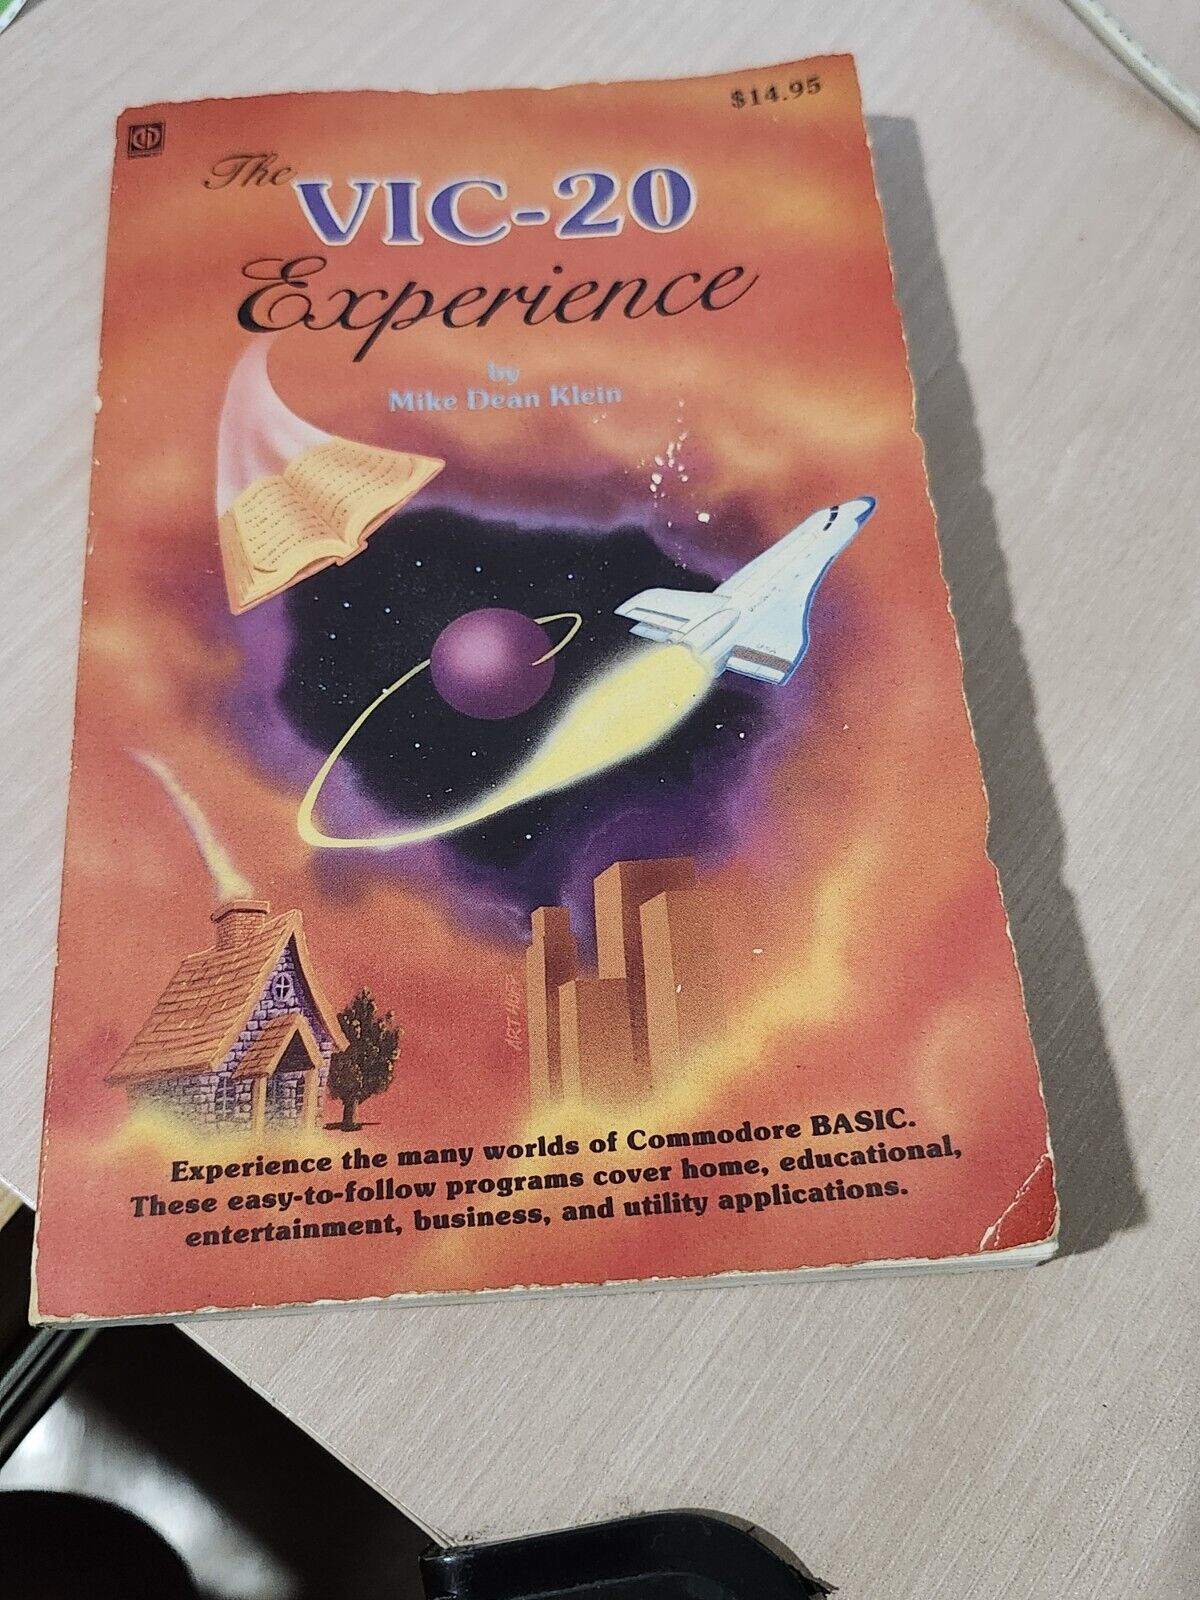 The Vic-20 Experience Book By Mike Dean Kline Commodore Basic Vic20 Vic 20